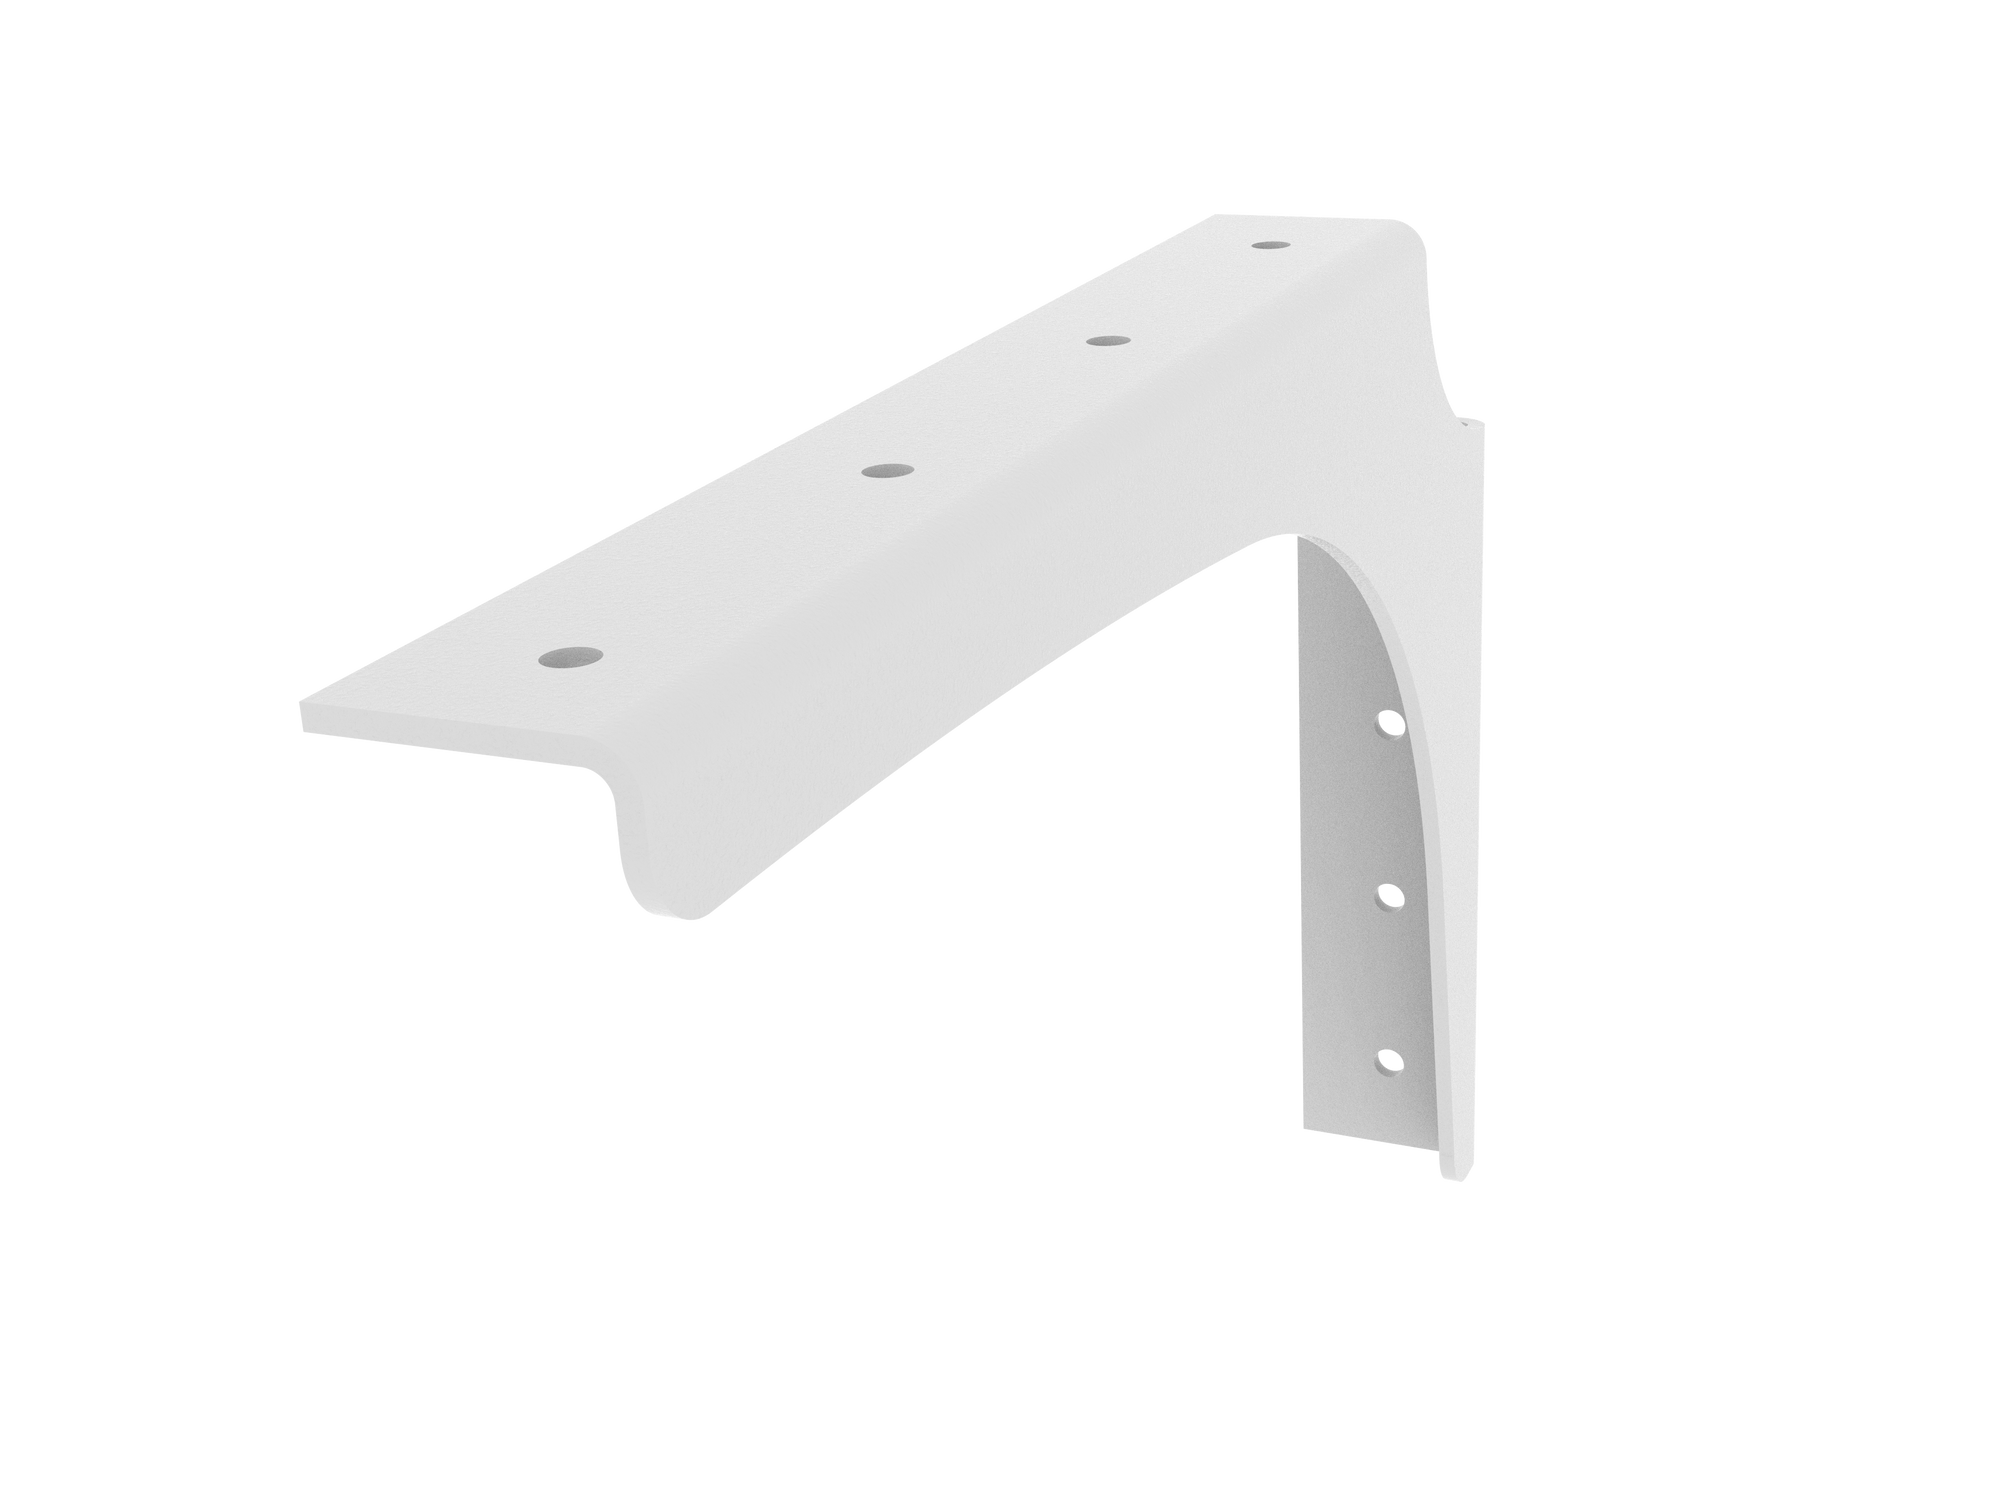 Universal Commercial Support Bracket - 12" x 8" Right with White Powder Coat Finish. Supports floating ADA-compliant vanities, desks, shelving, countertops, and more.